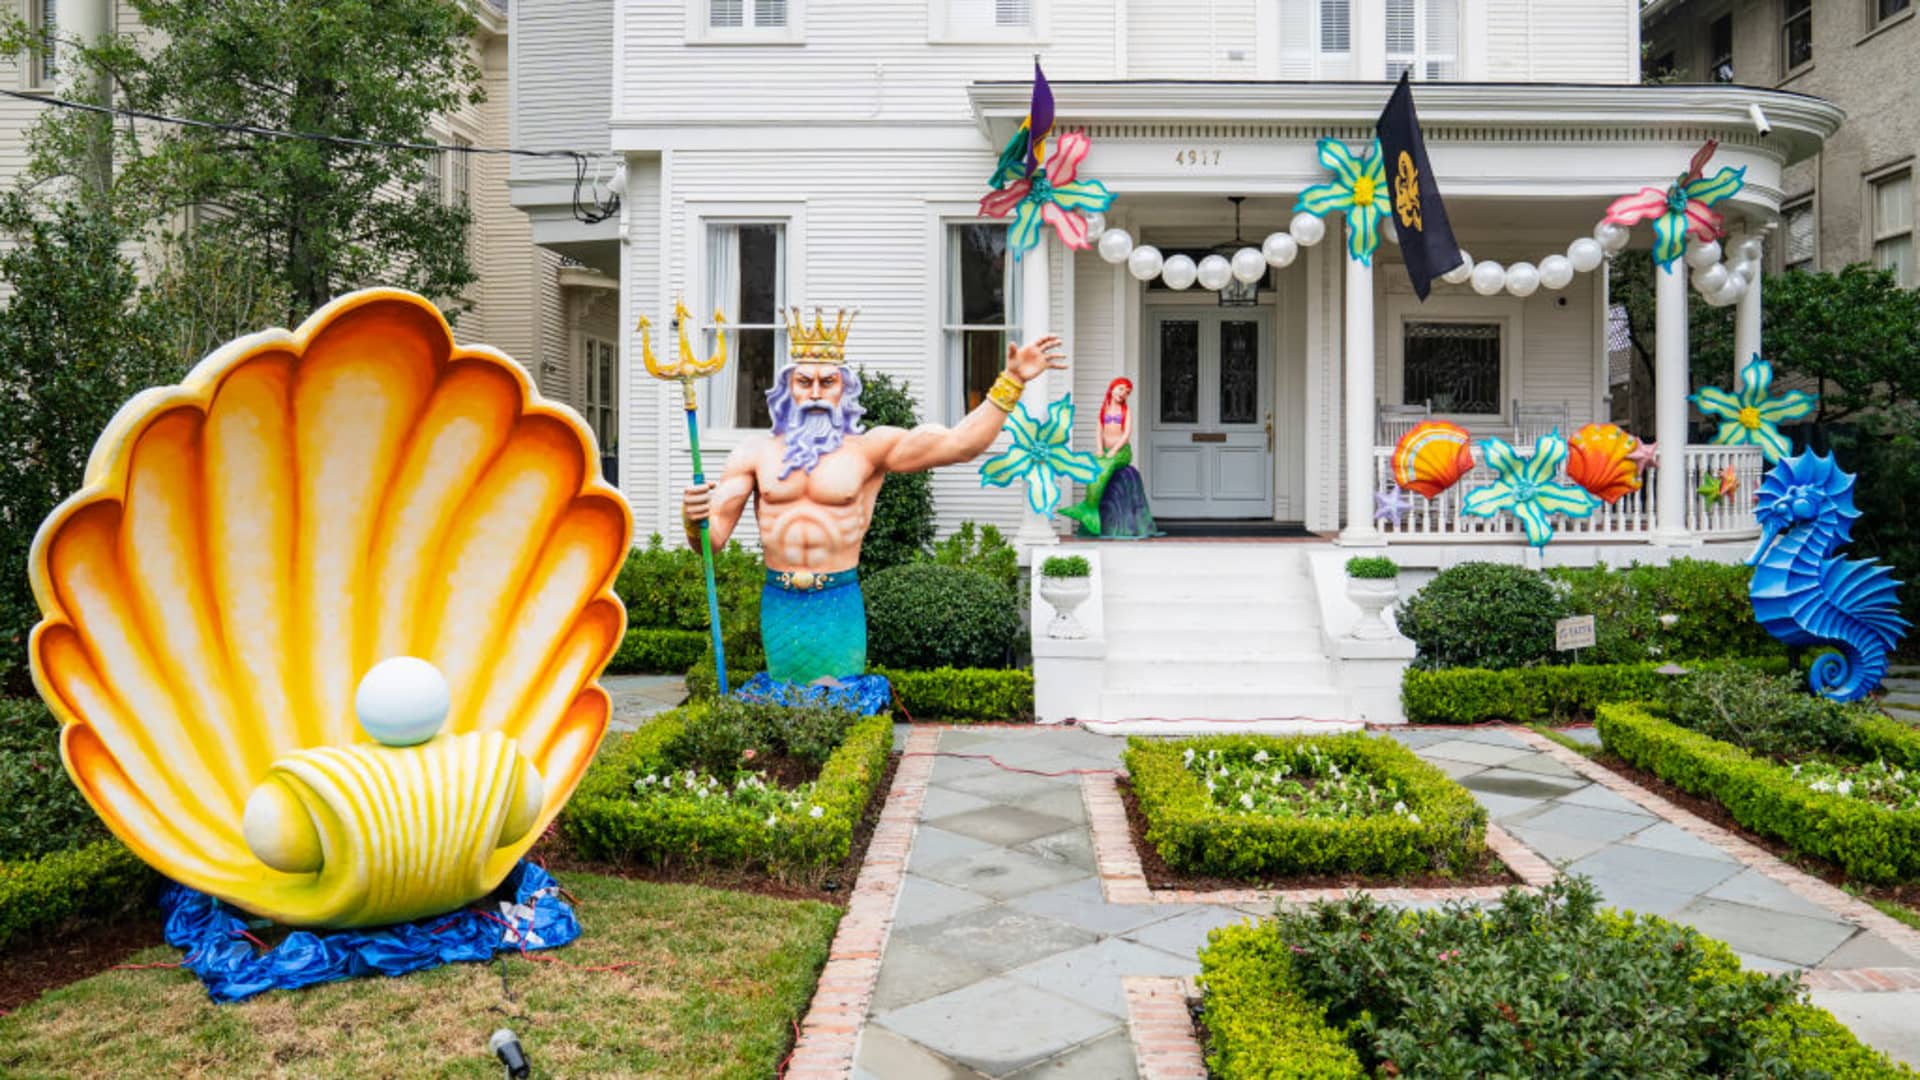 A home on St. Charles Avenue is decorated with The Little Mermaid theme on February 13, 2021 in New Orleans, Louisiana.